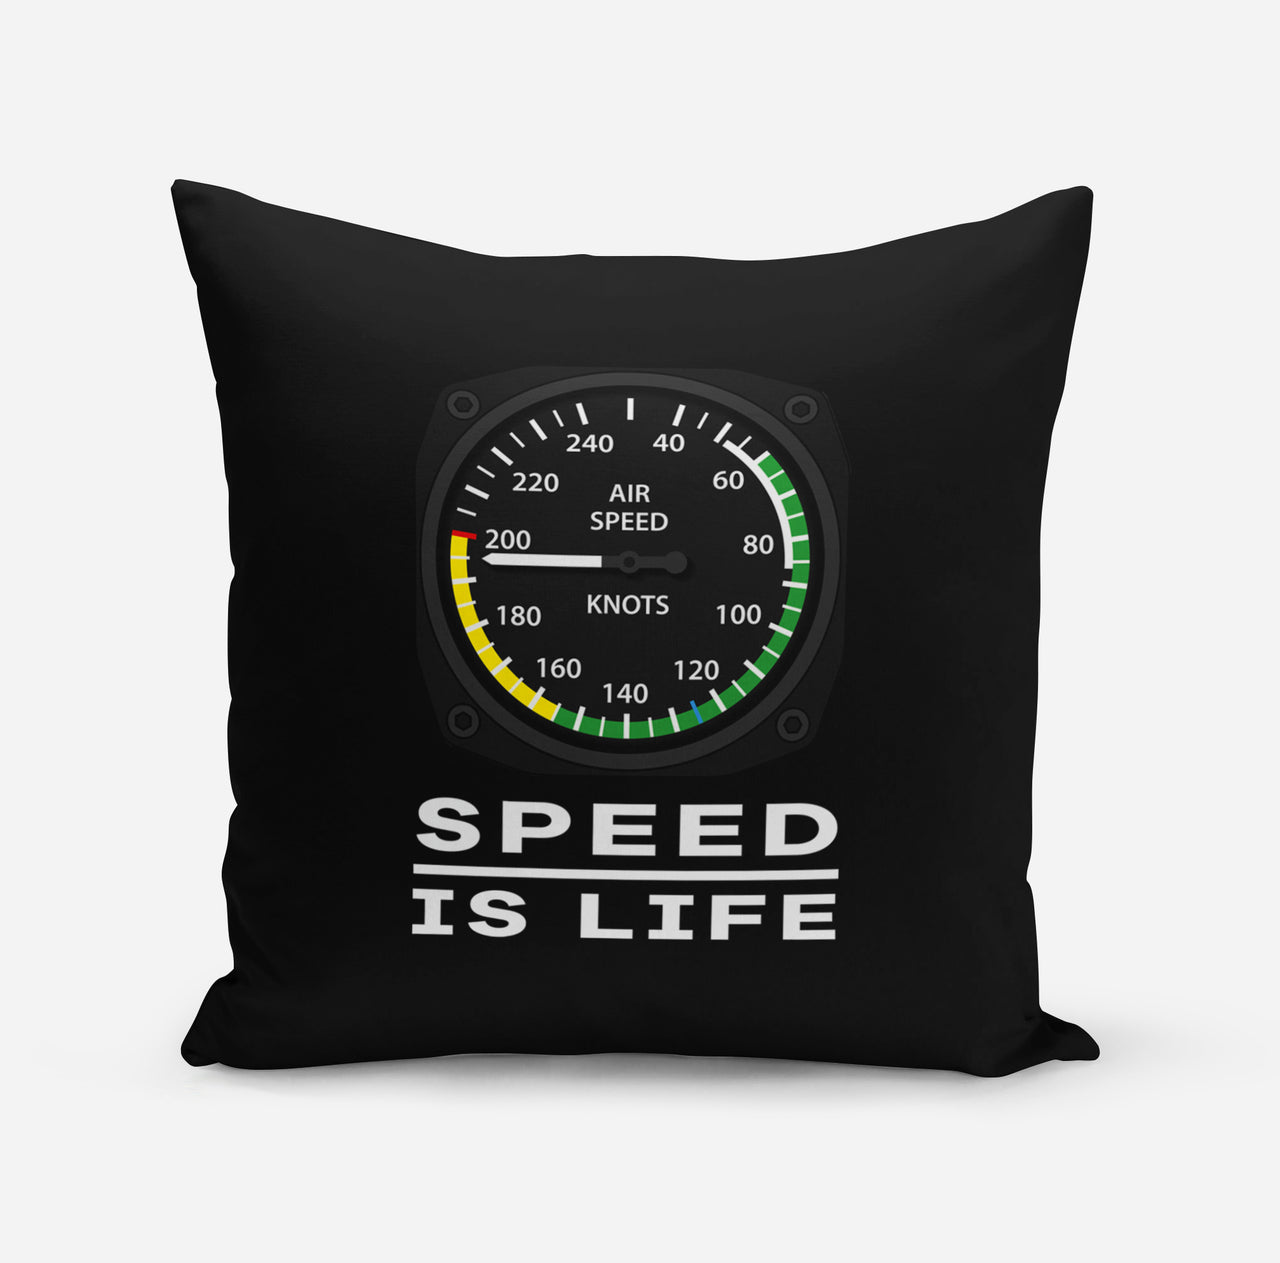 Speed Is Life Designed Pillows